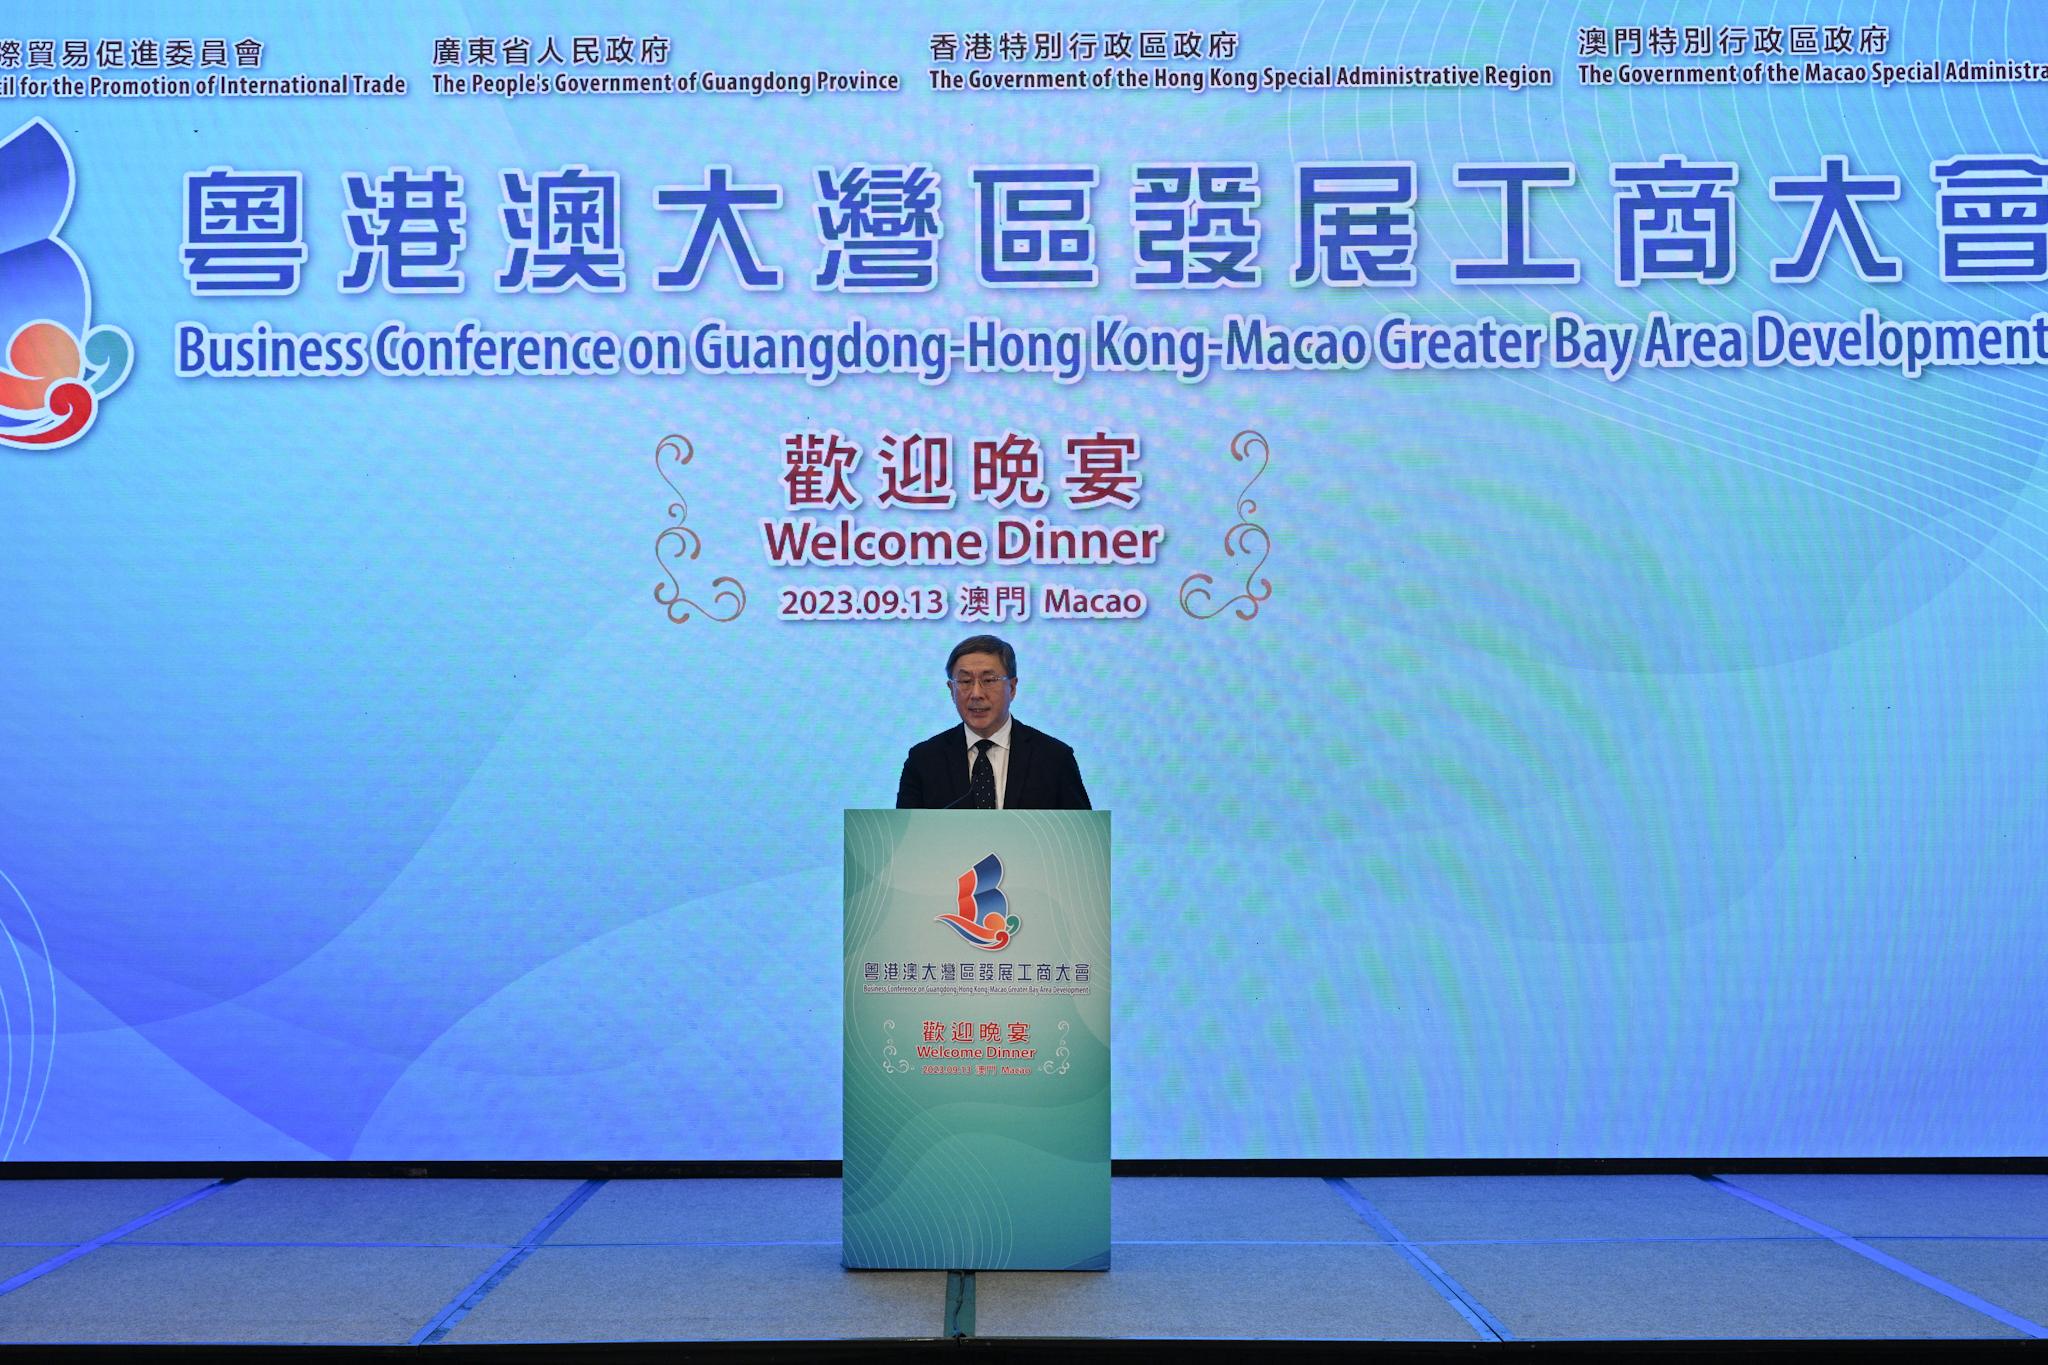 The Deputy Chief Secretary for Administration, Mr Cheuk Wing-hing delivers speech at welcome dinner of the Business Conference on Guangdong-Hong Kong-Macao Greater Bay Area Development in Macao this evening (September 13).